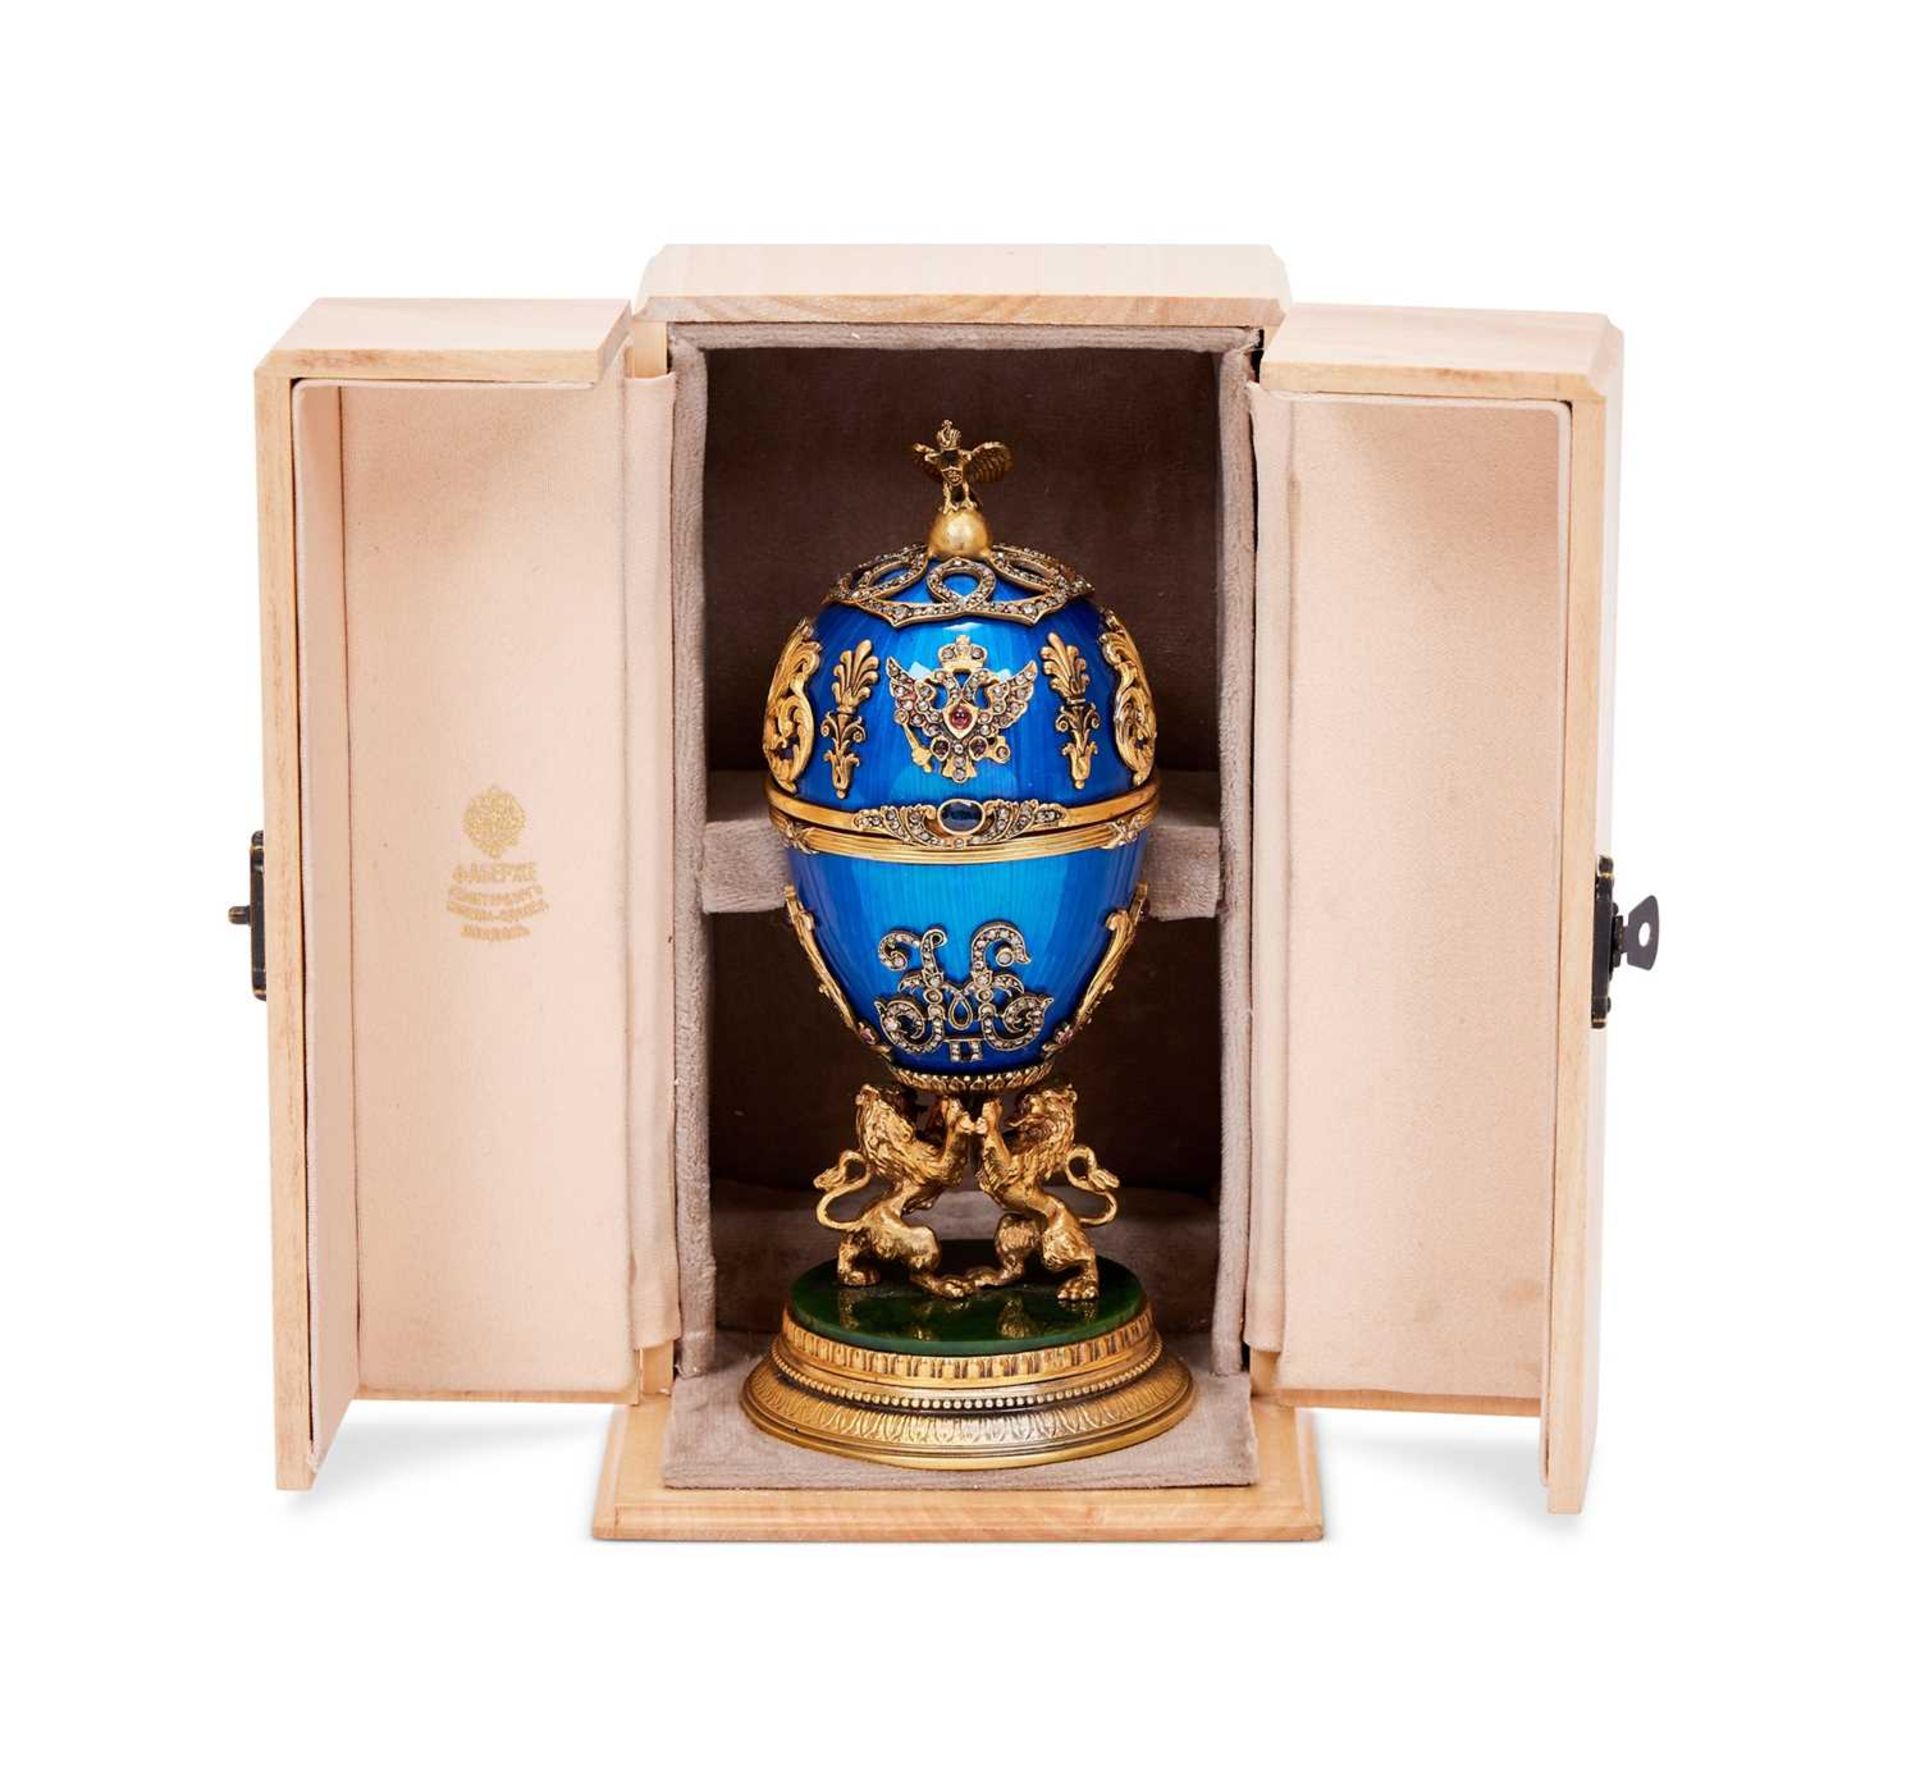 A FABERGE STYLE DIAMOND ENCRUSTED, GUILLOCHE ENAMEL AND SILVER GILT EGG - Image 3 of 3